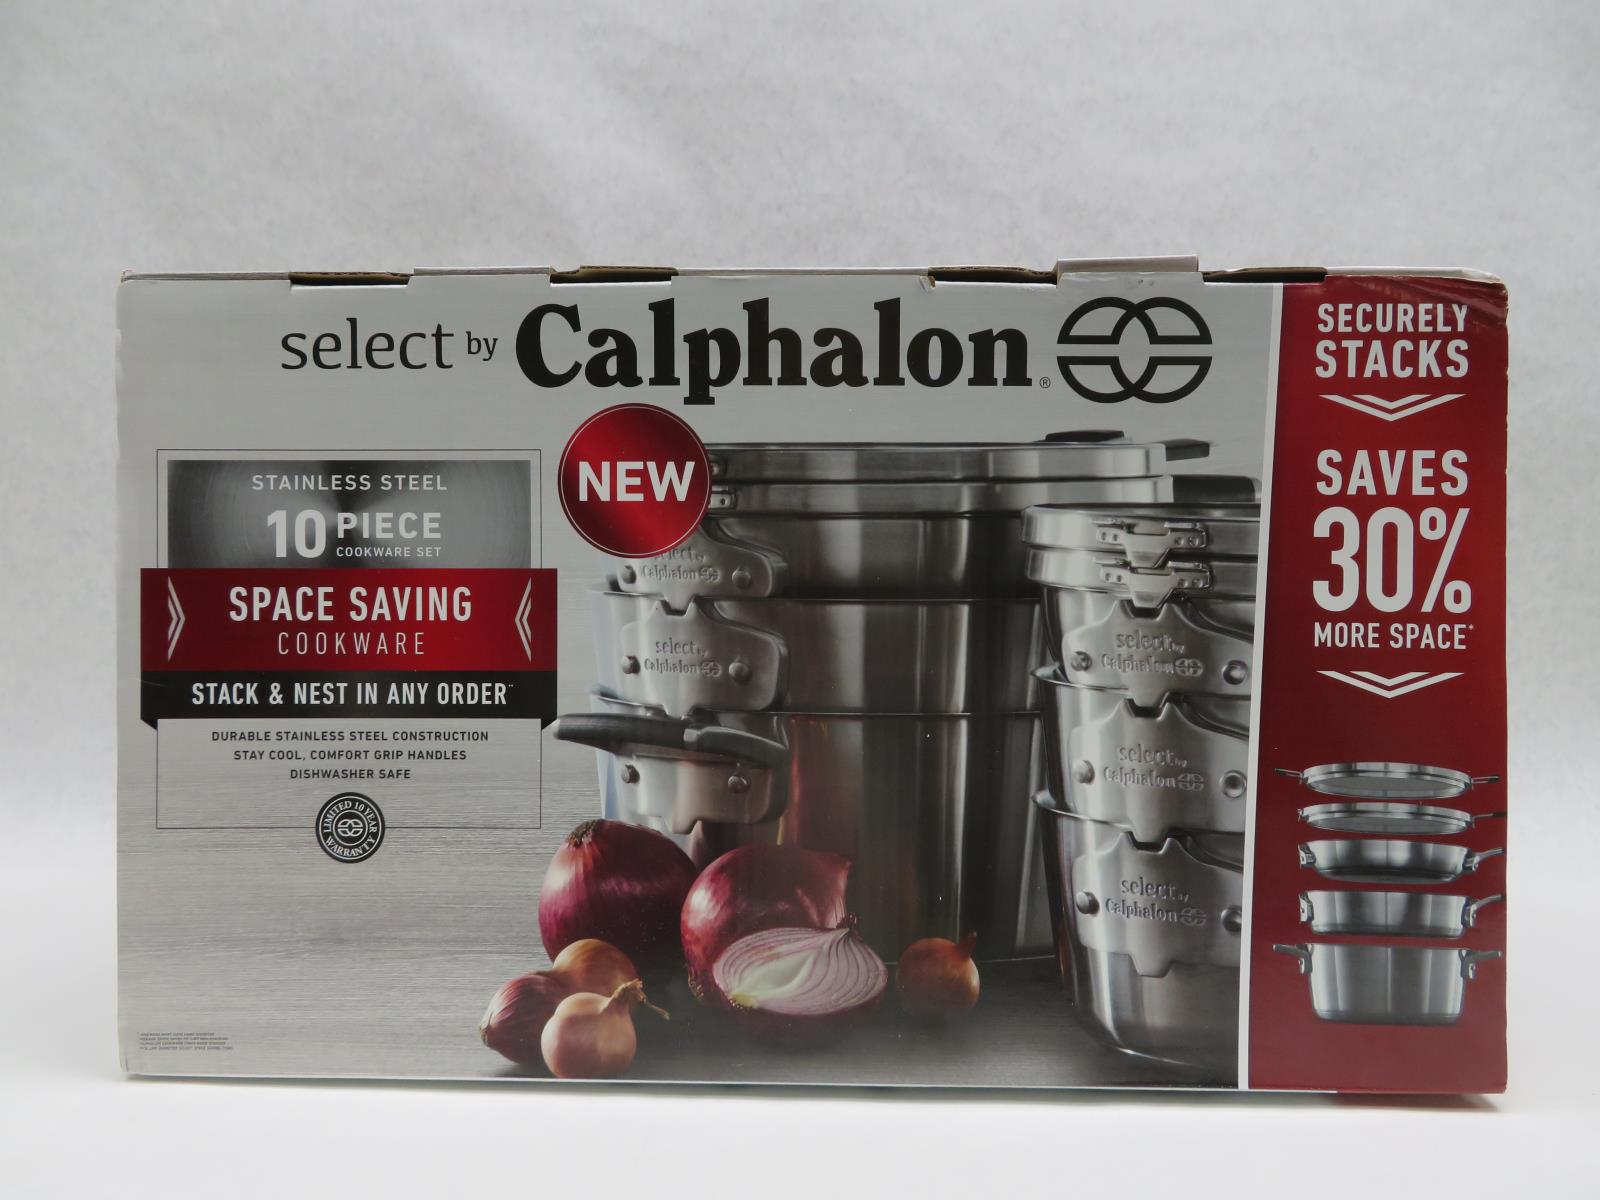 Select by Calphalon 10pc Stainless Steel Space Saving Cookware Set Select By Calphalon 10pc Stainless Steel Space Saving Set